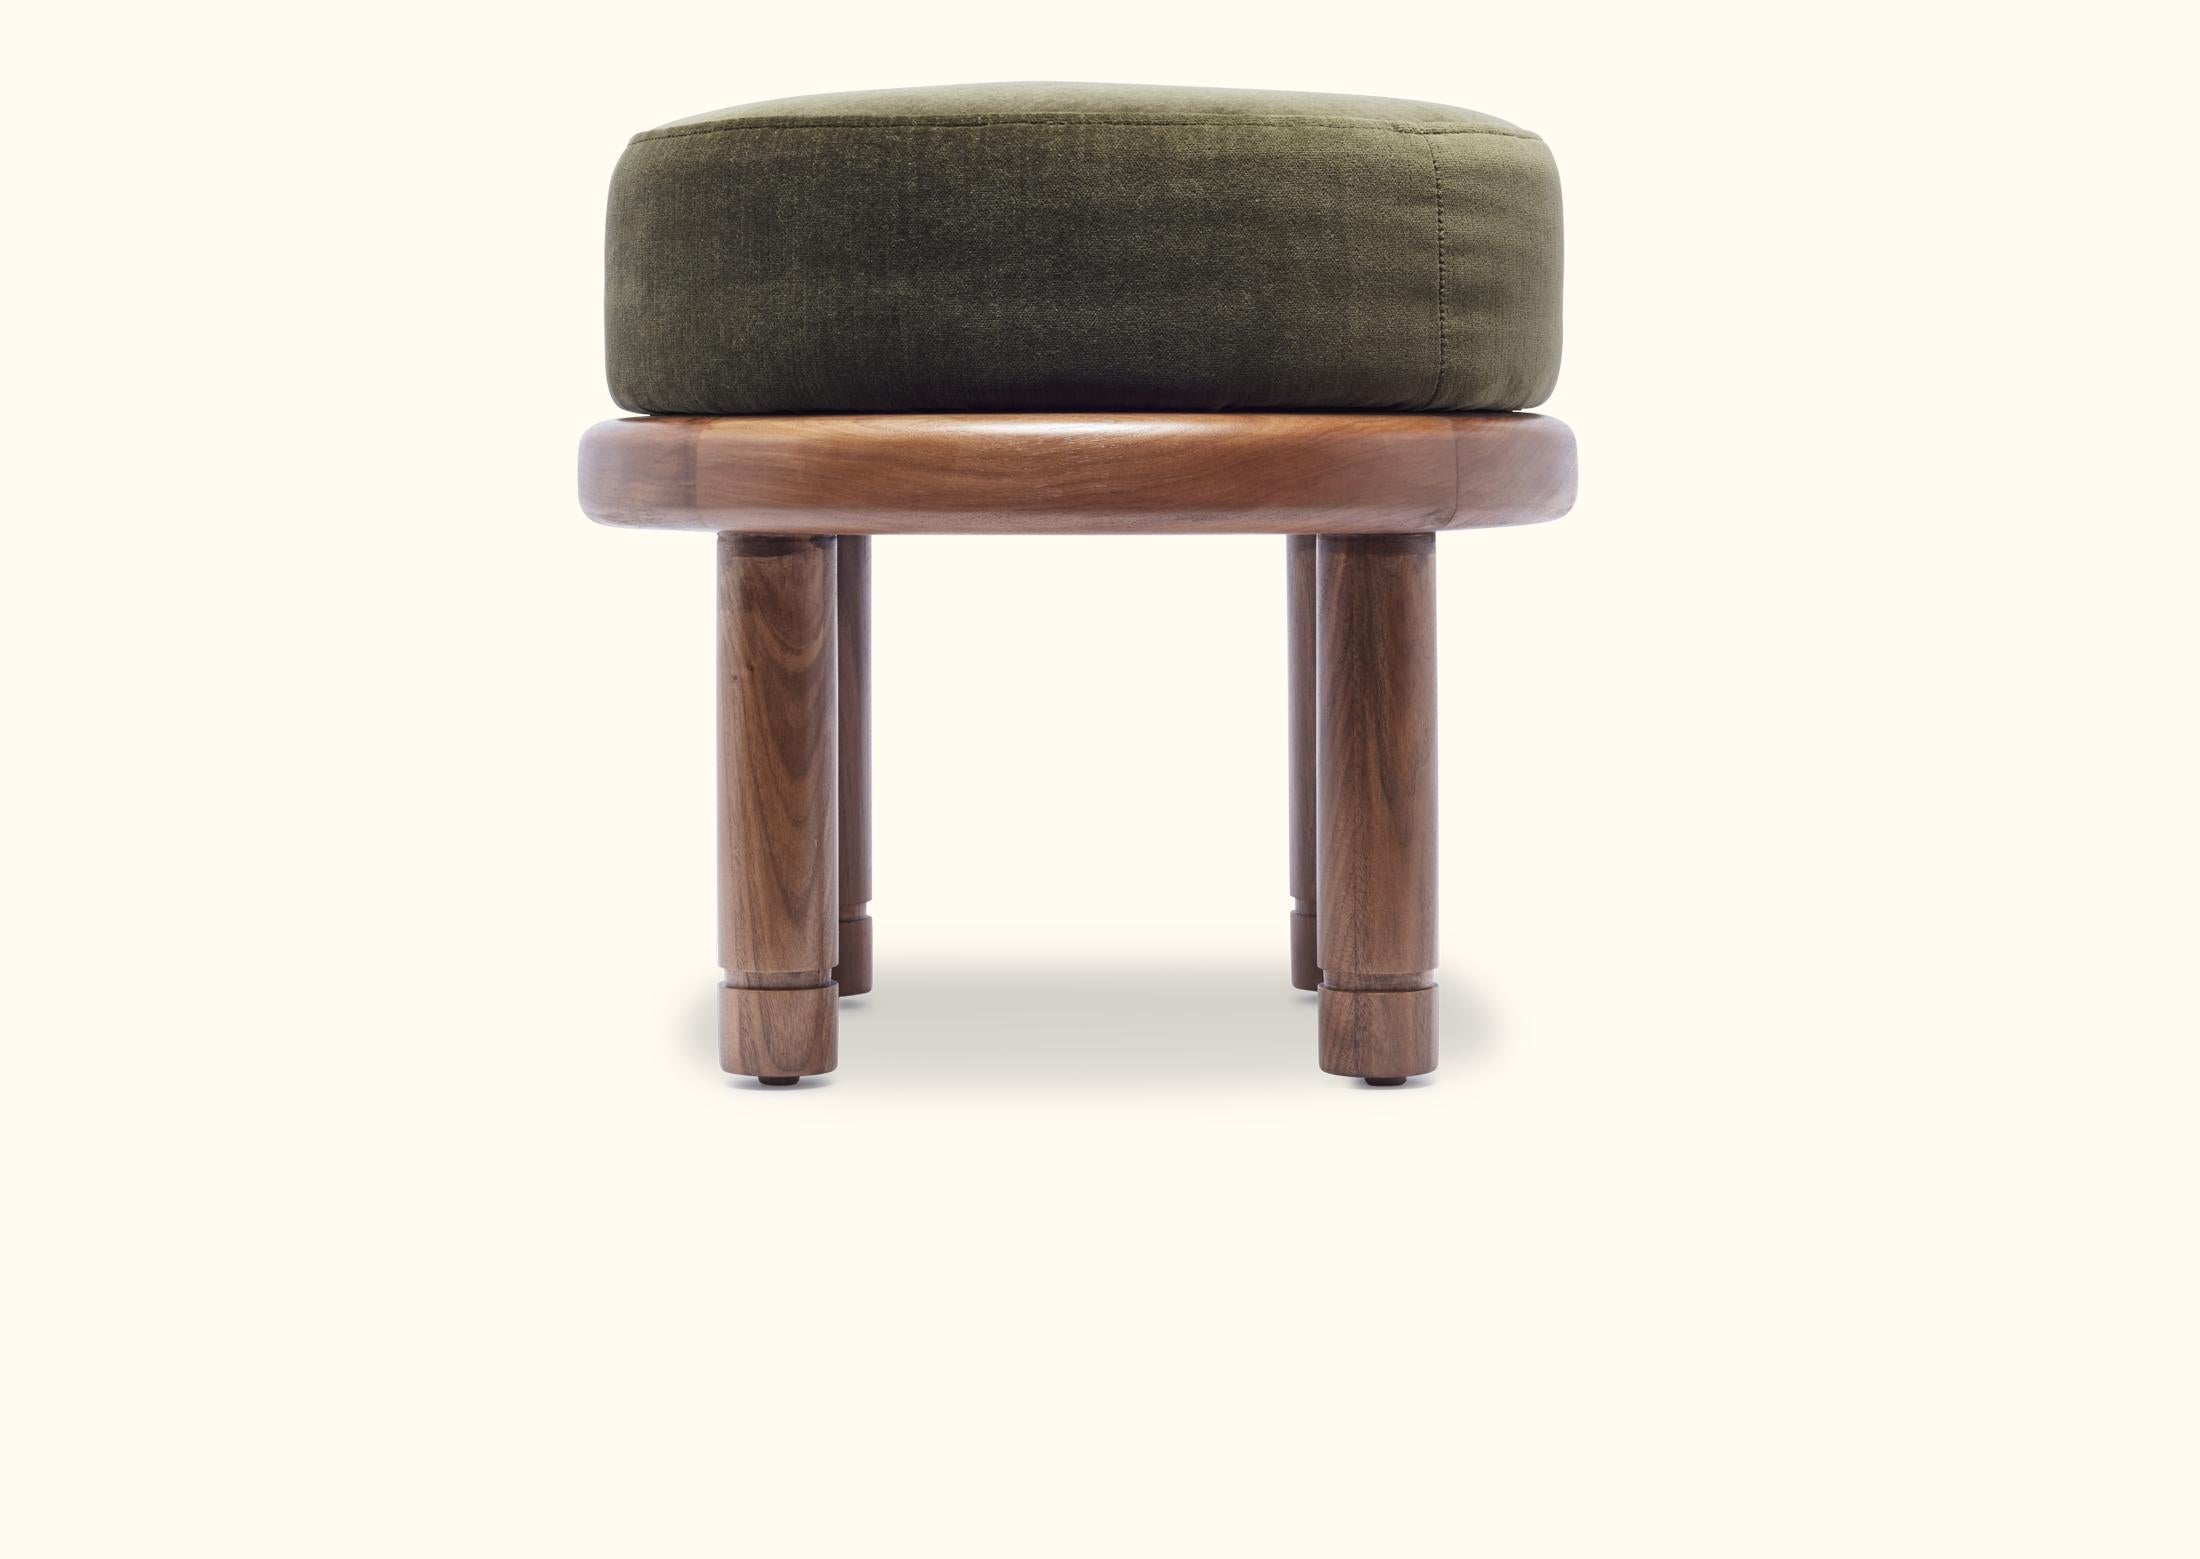 The Petite Moreno Ottoman features a round solid wood base with four cylindrical legs and an upholstered top. Available in American walnut or white oak.

As shown: $1,100
To order: $975 + COM.